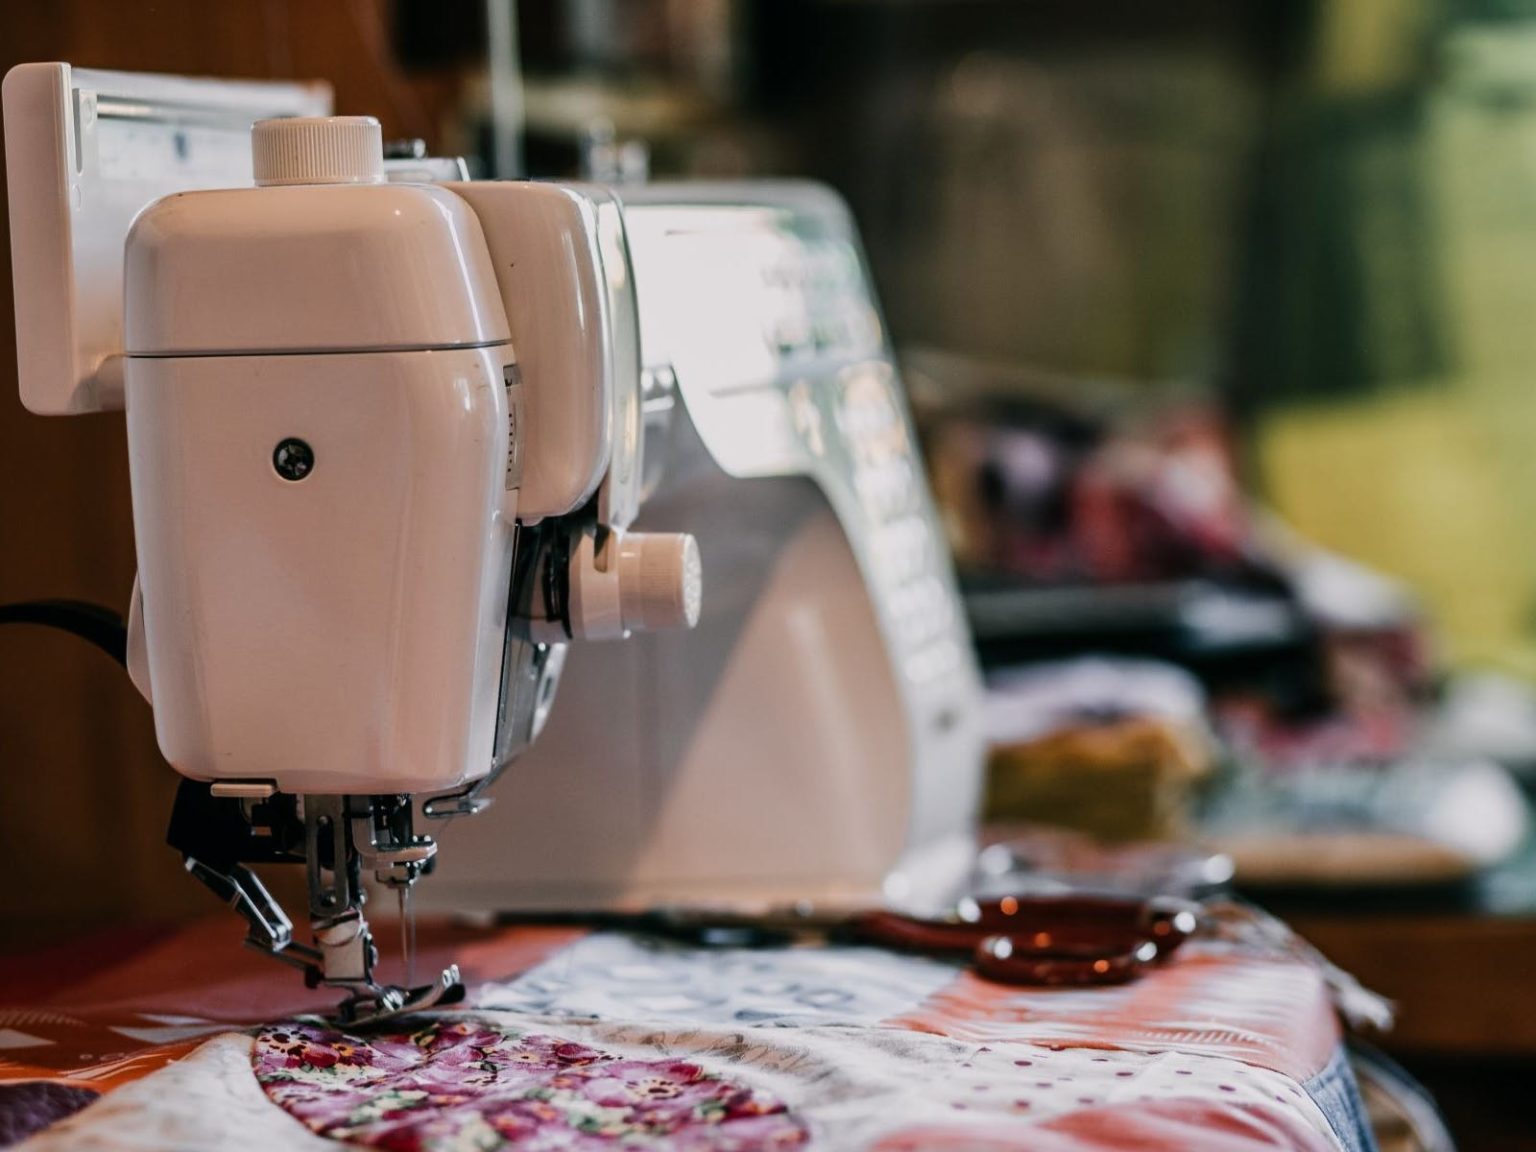 Image of sewing machine  with a pink quilt being sewed